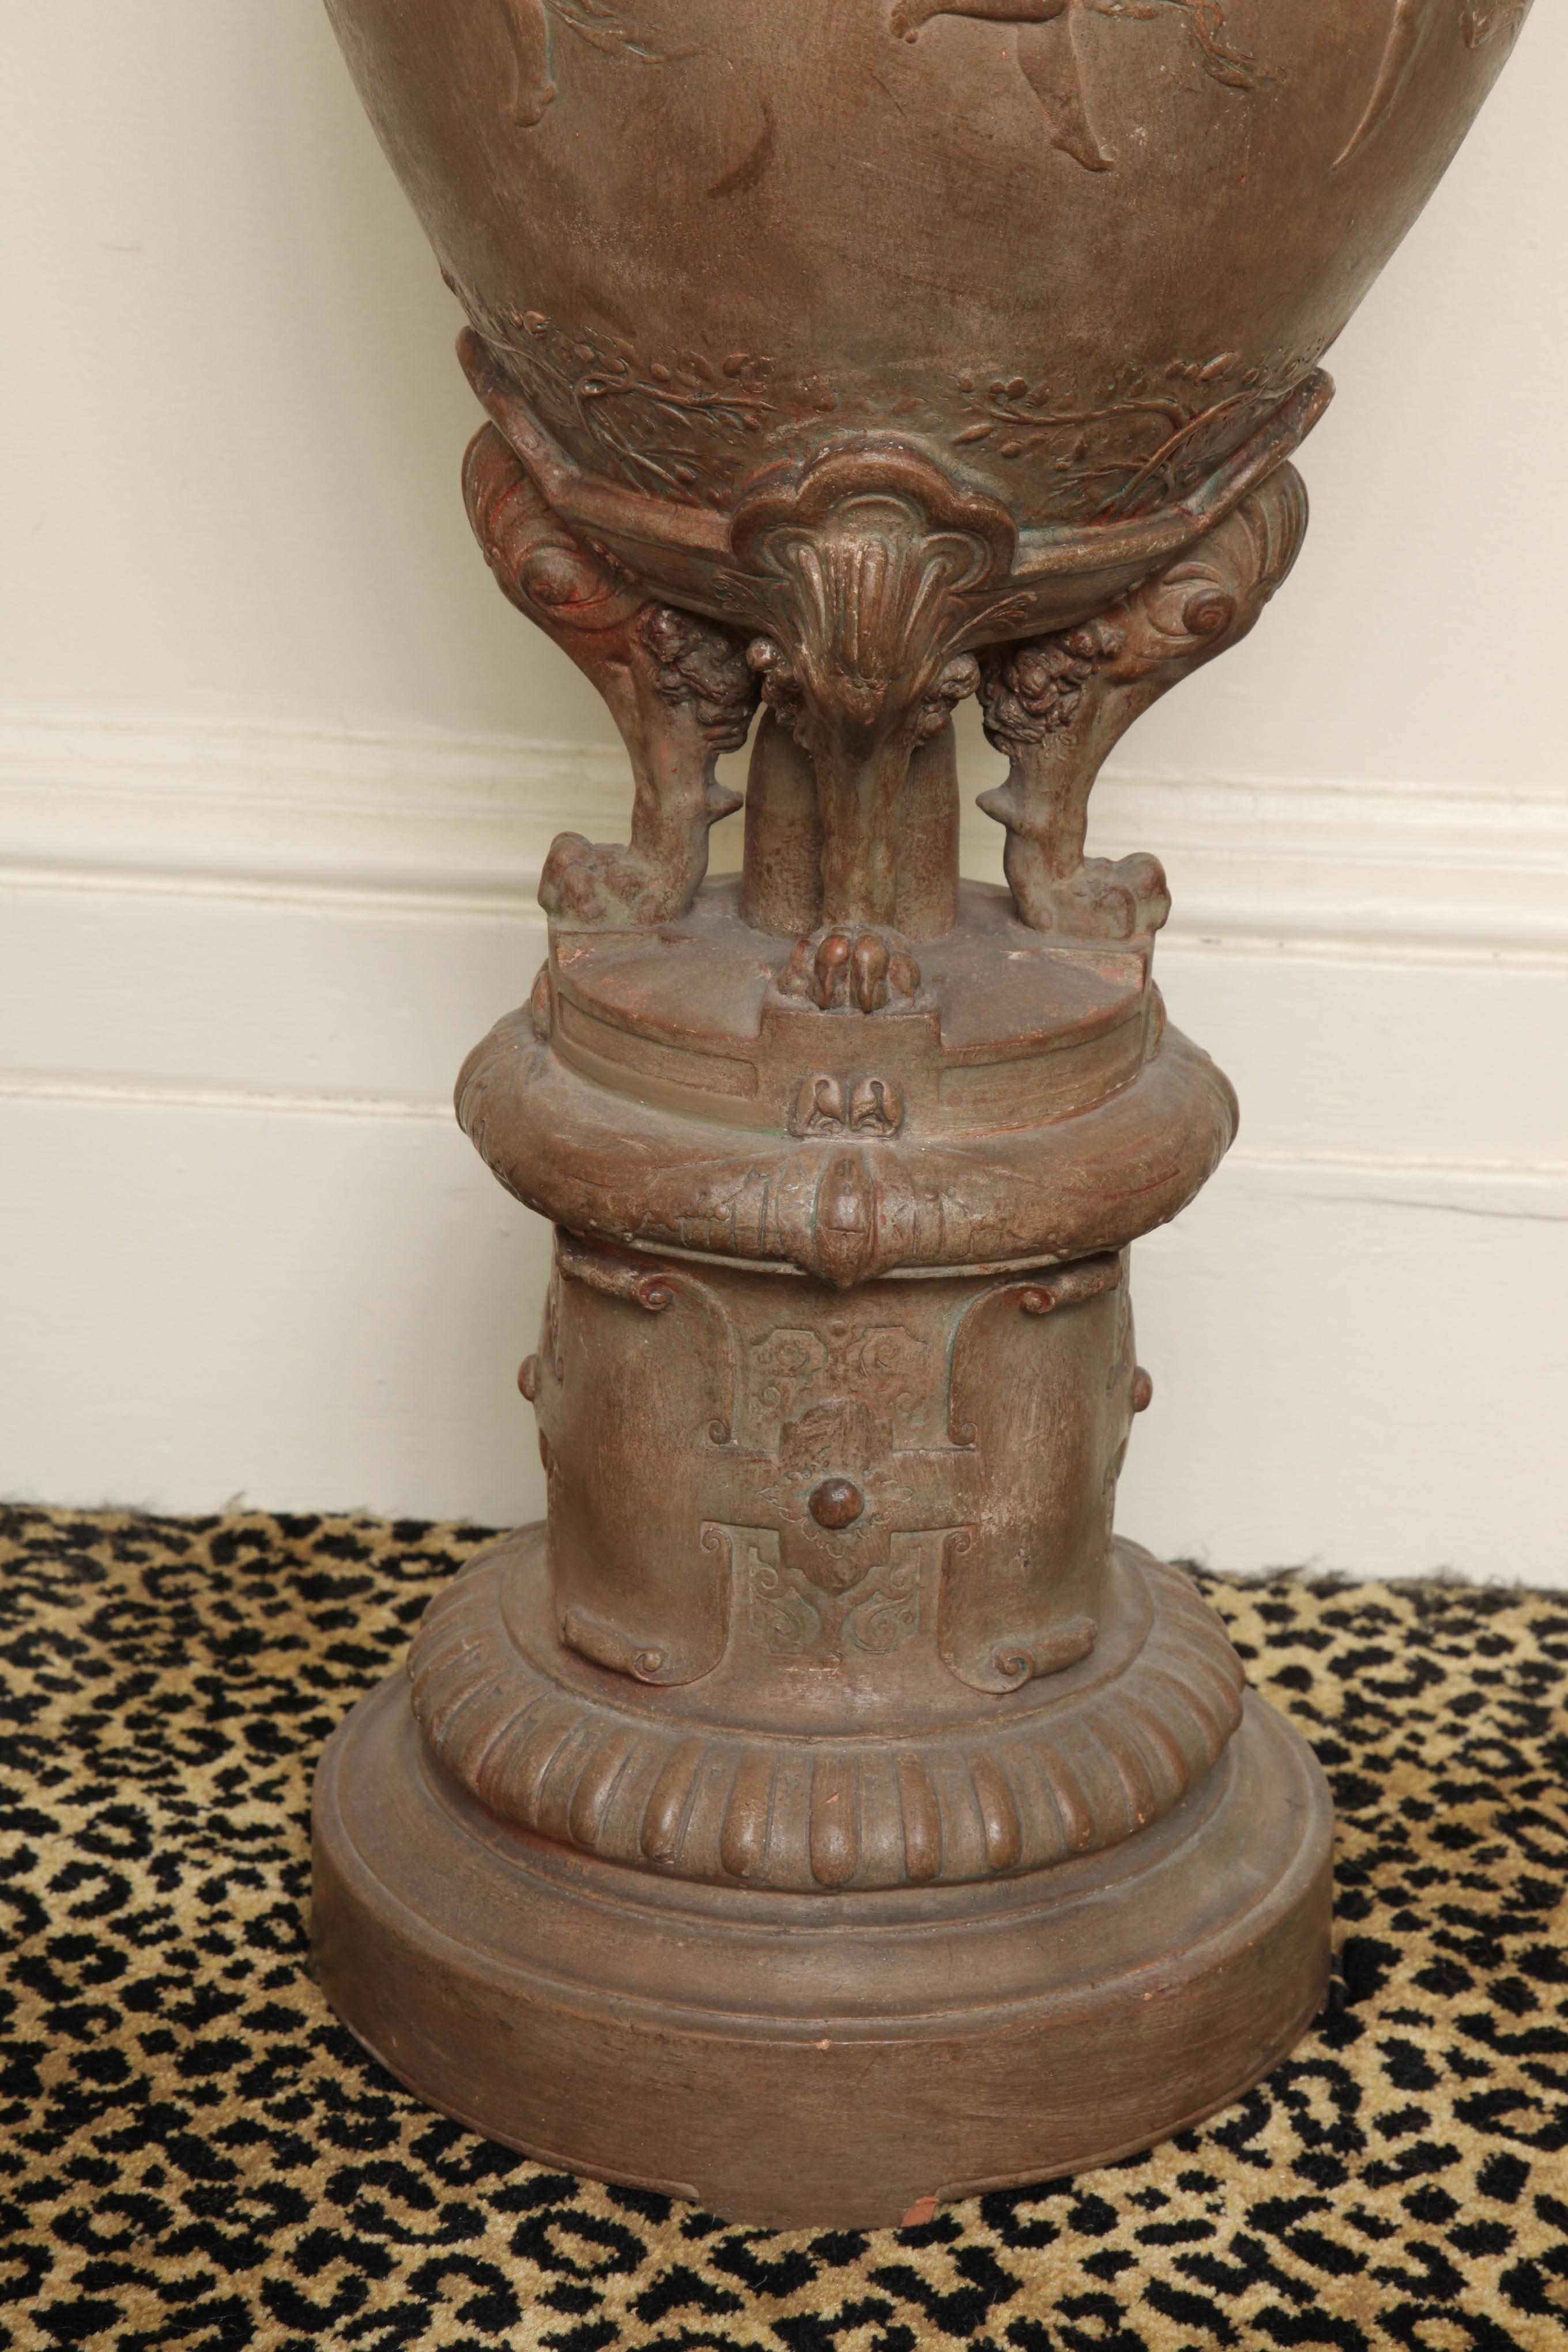 Finely executed urn by sculptor Joseph Chéret (French, 1838-1894) inset with period aluminum liner for flowers. Epitomizes the mid-19th century Second Empire style with French Renaissance Revival motifs including strapwork cartouches and dancing